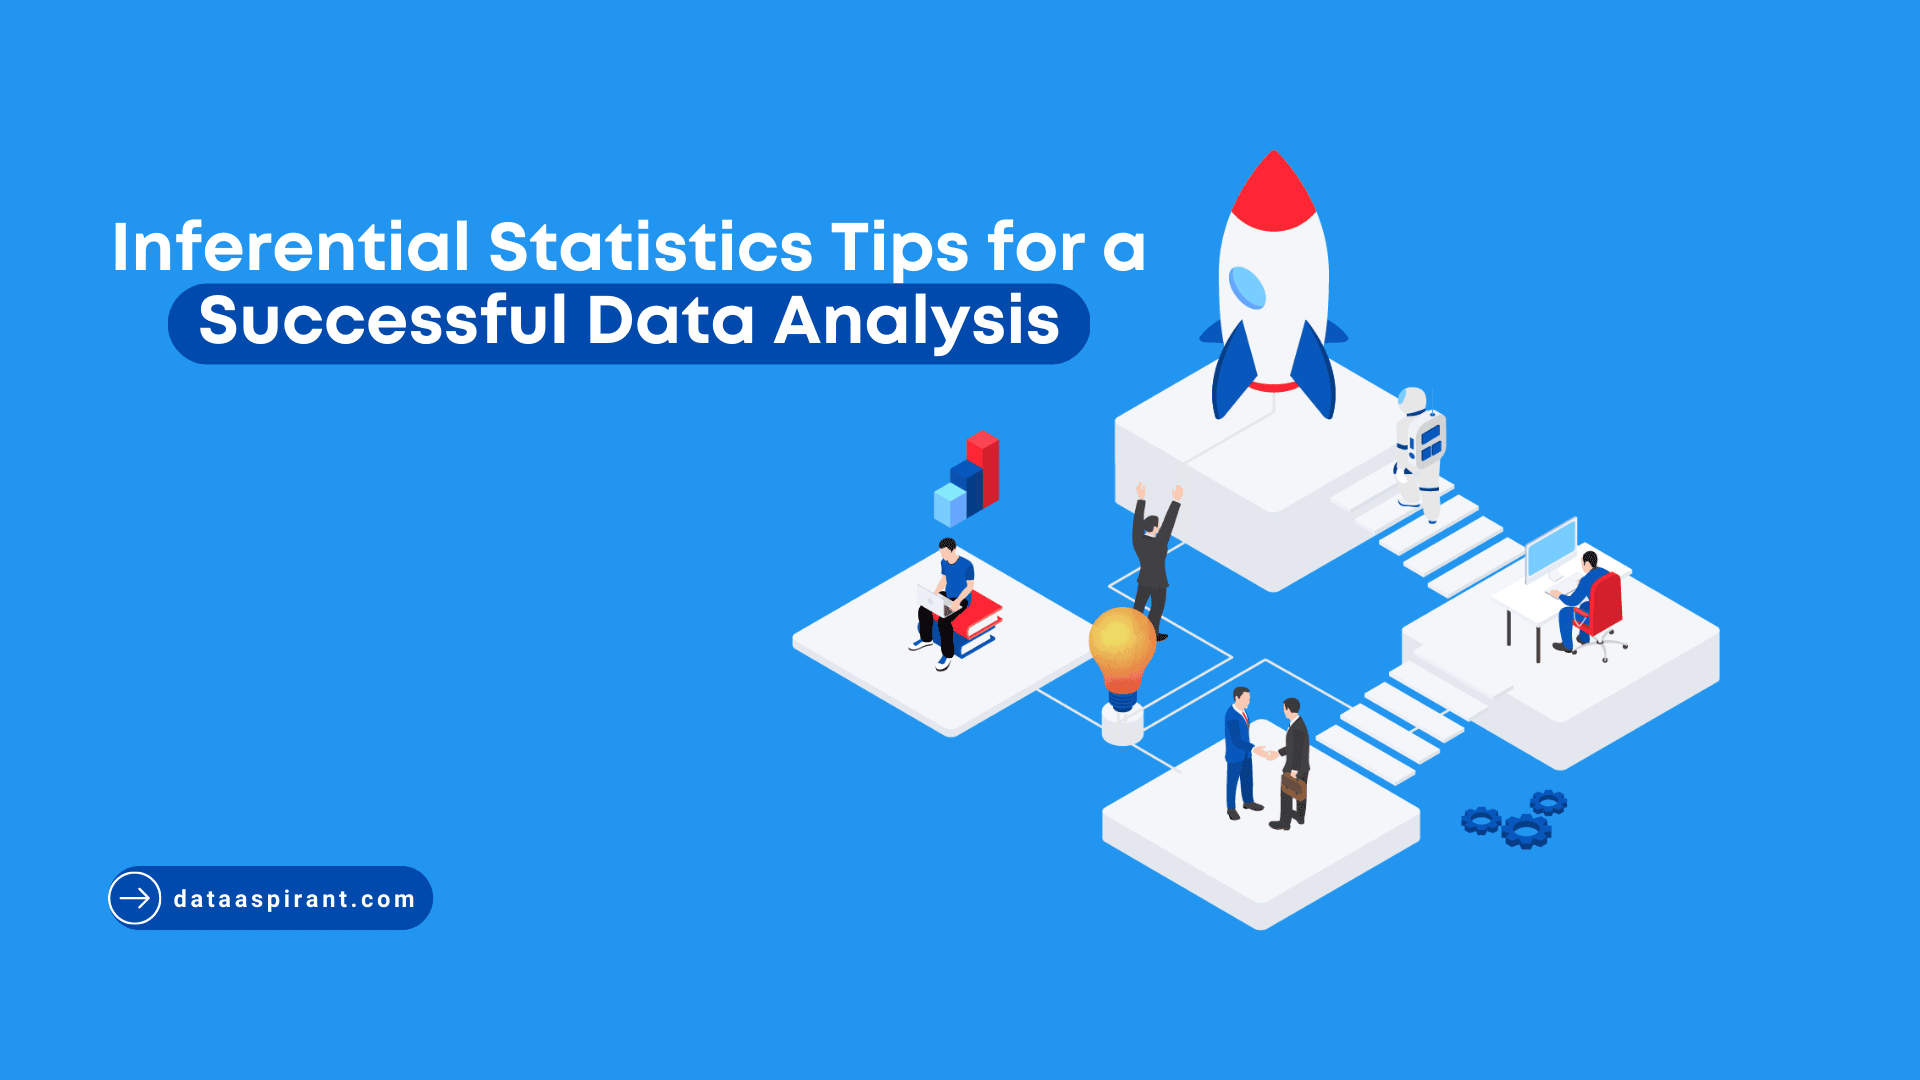 Inferential Statistics Tips for a Successful Data Analysis